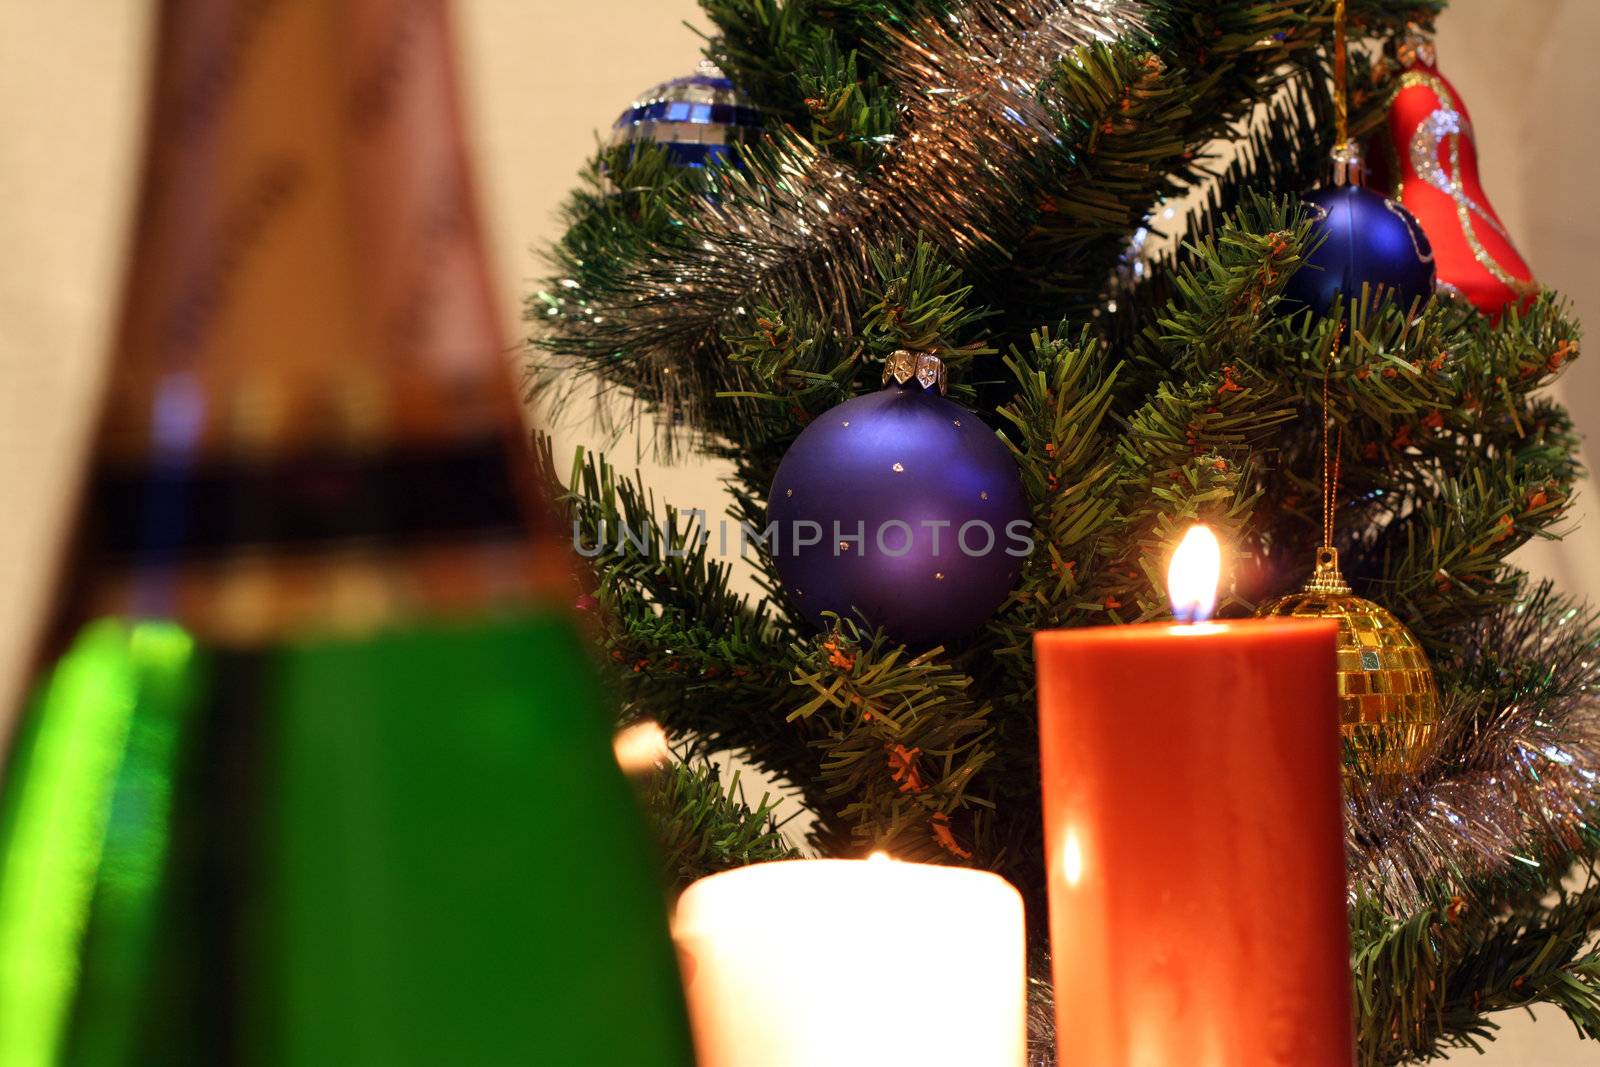 New Year's or Cristmas Tree, burning candles and bottle of champagne out of focus